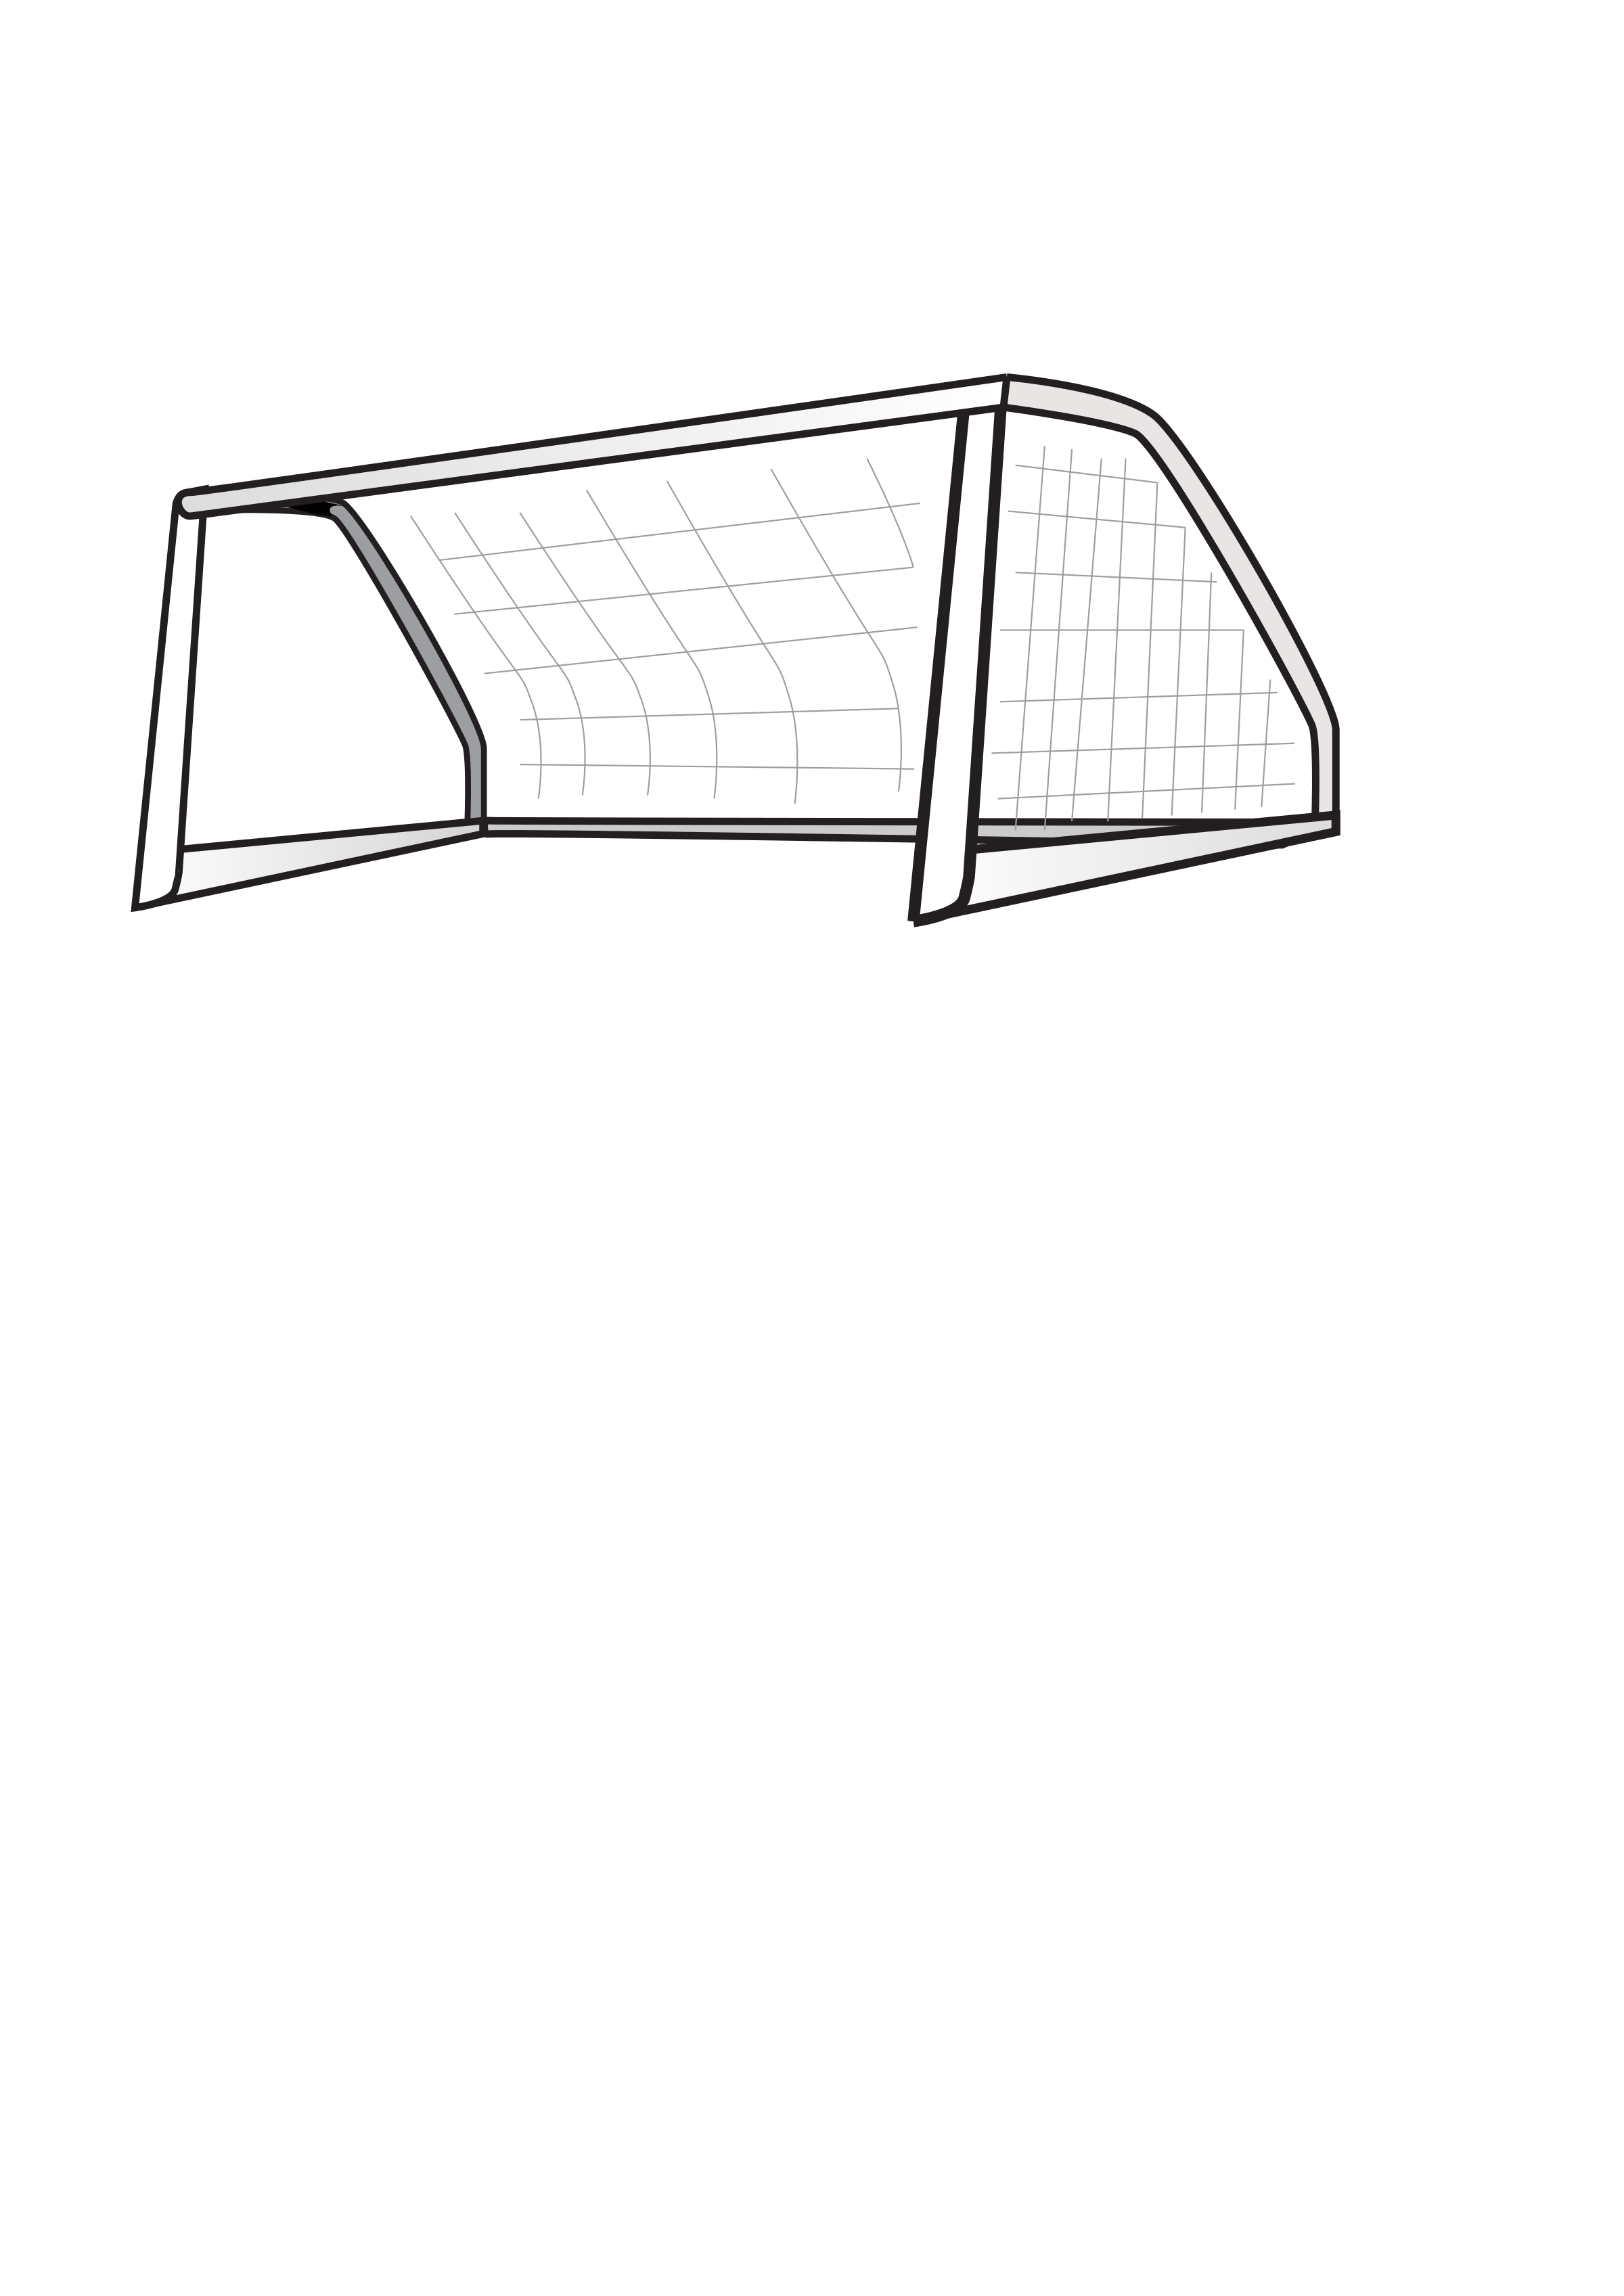 Football Goal Net Transparent Isolated Images PNG